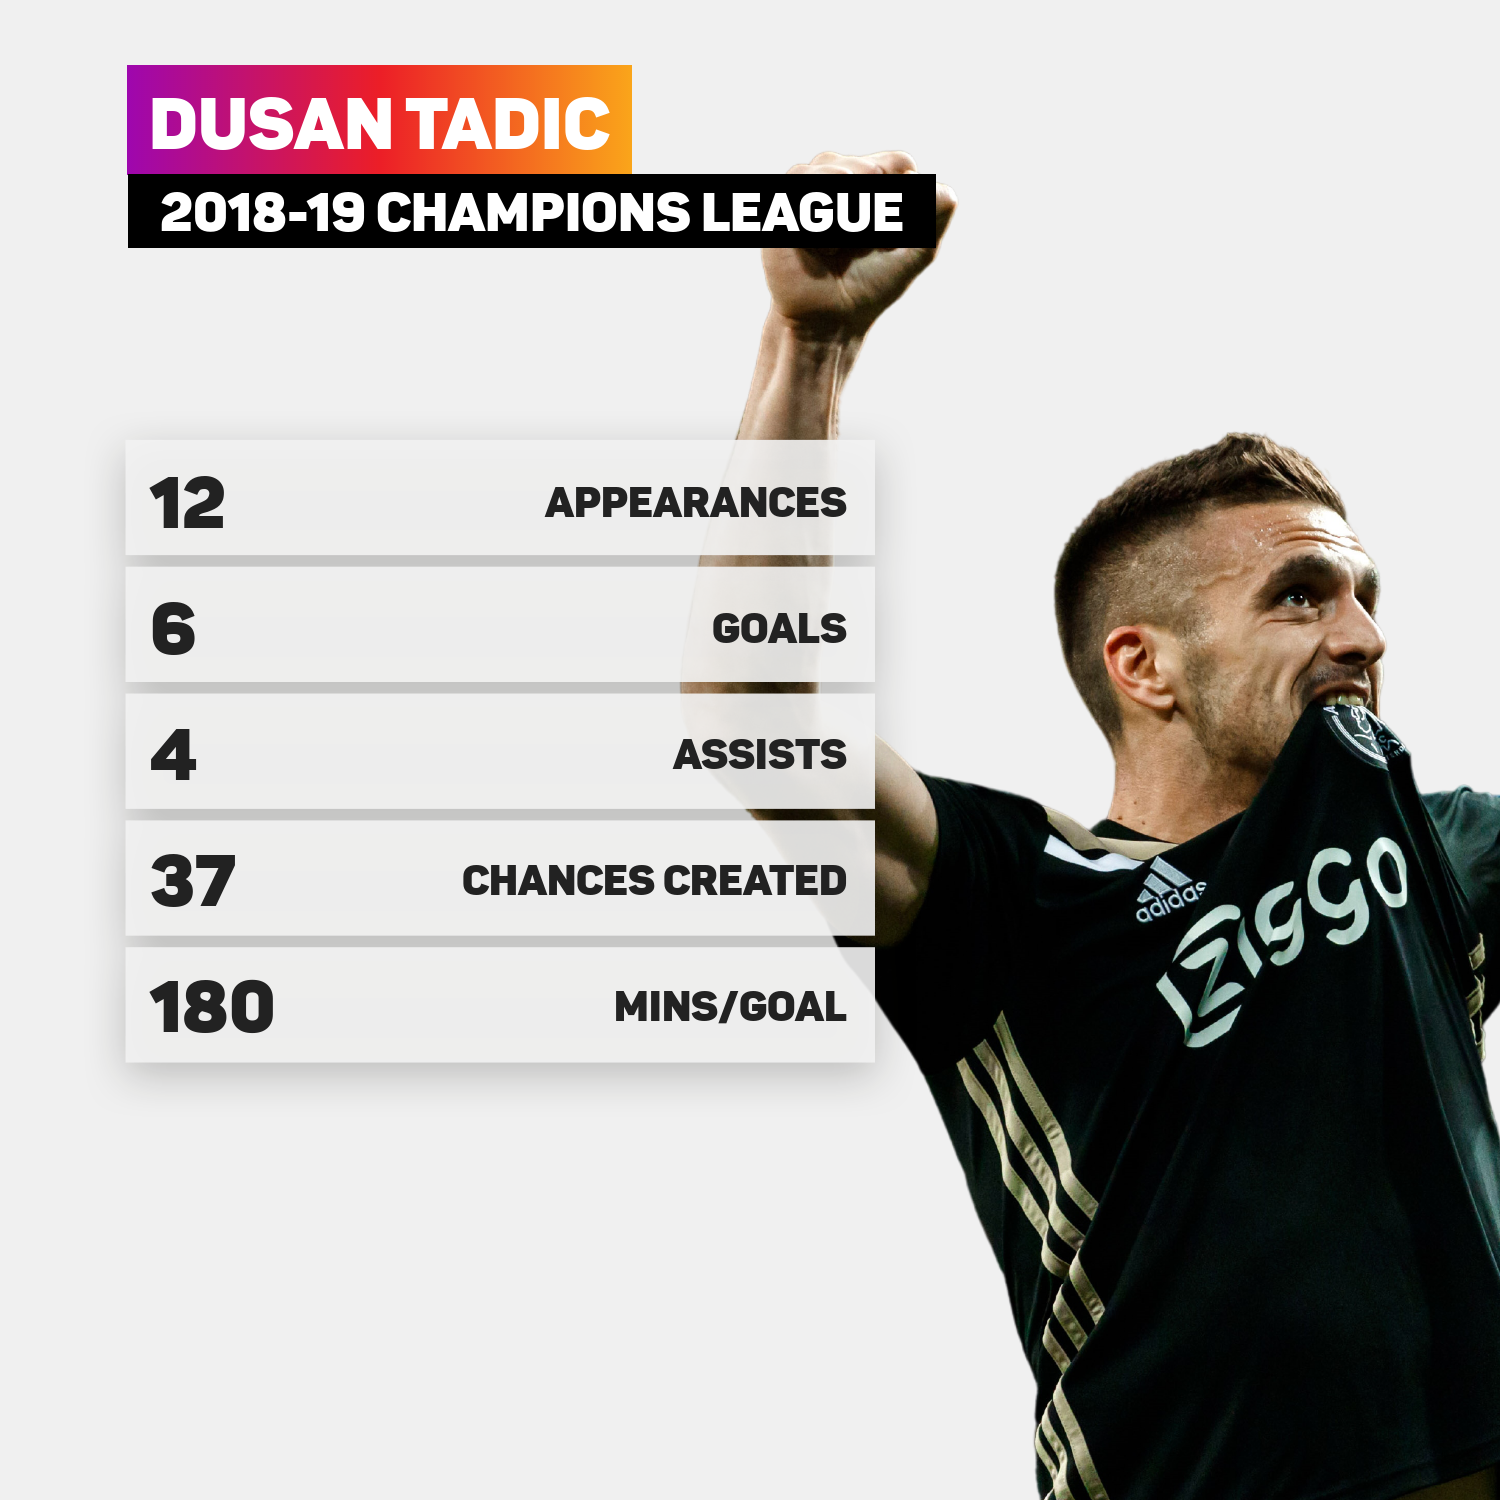 Tadic was a star of Ajax's Champions League run in 2018-19